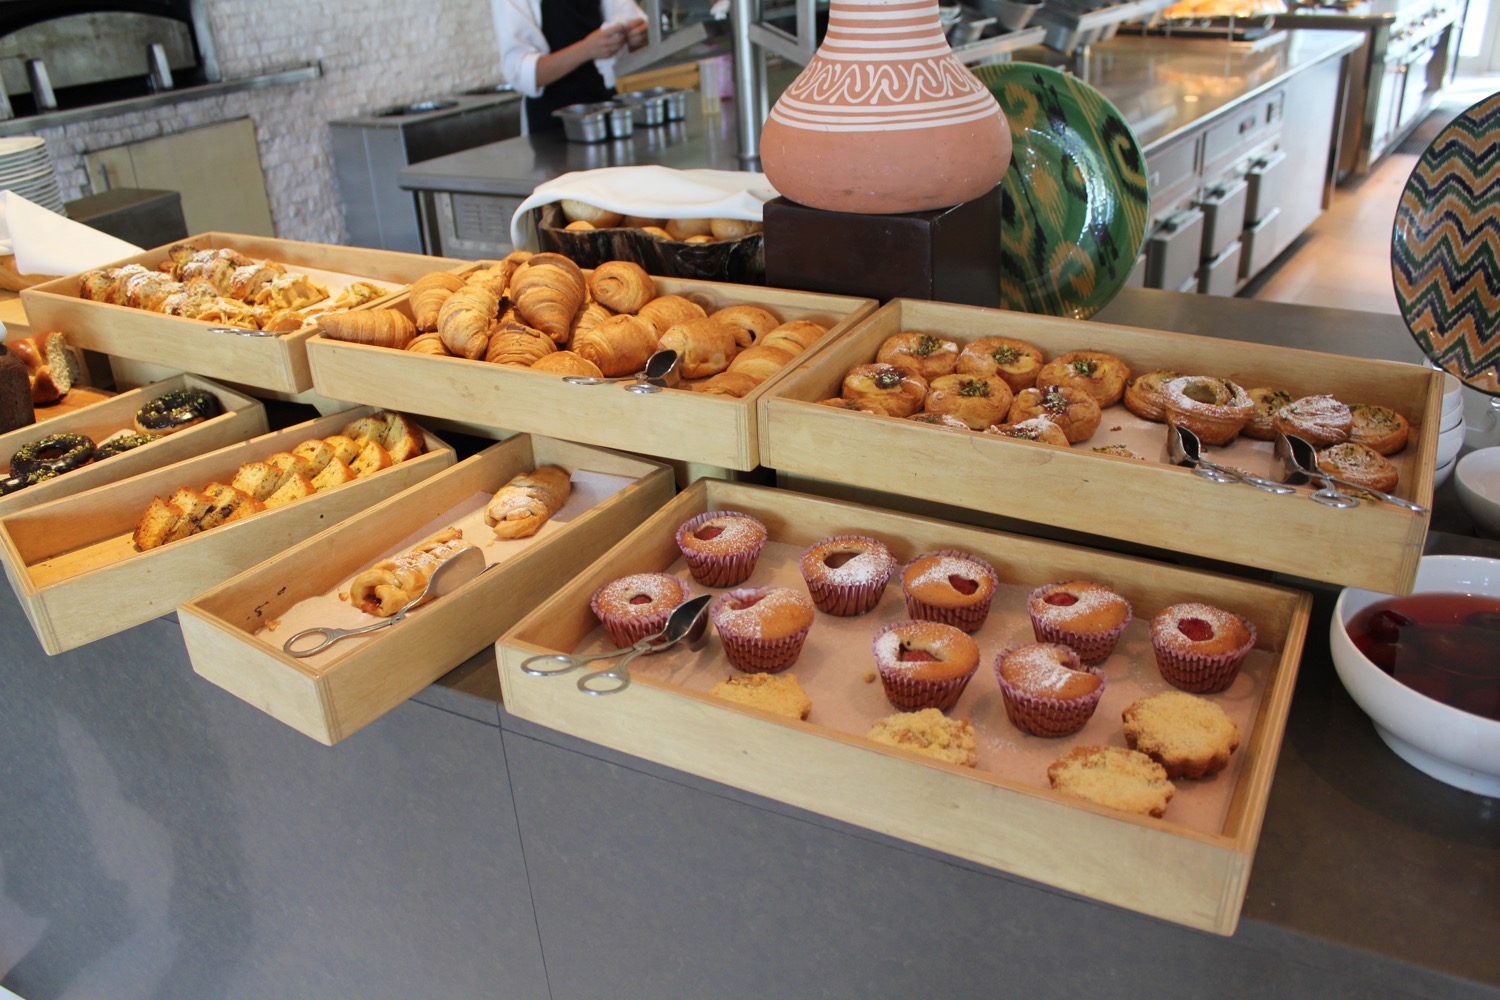 a trays of pastries and pastries in a kitchen